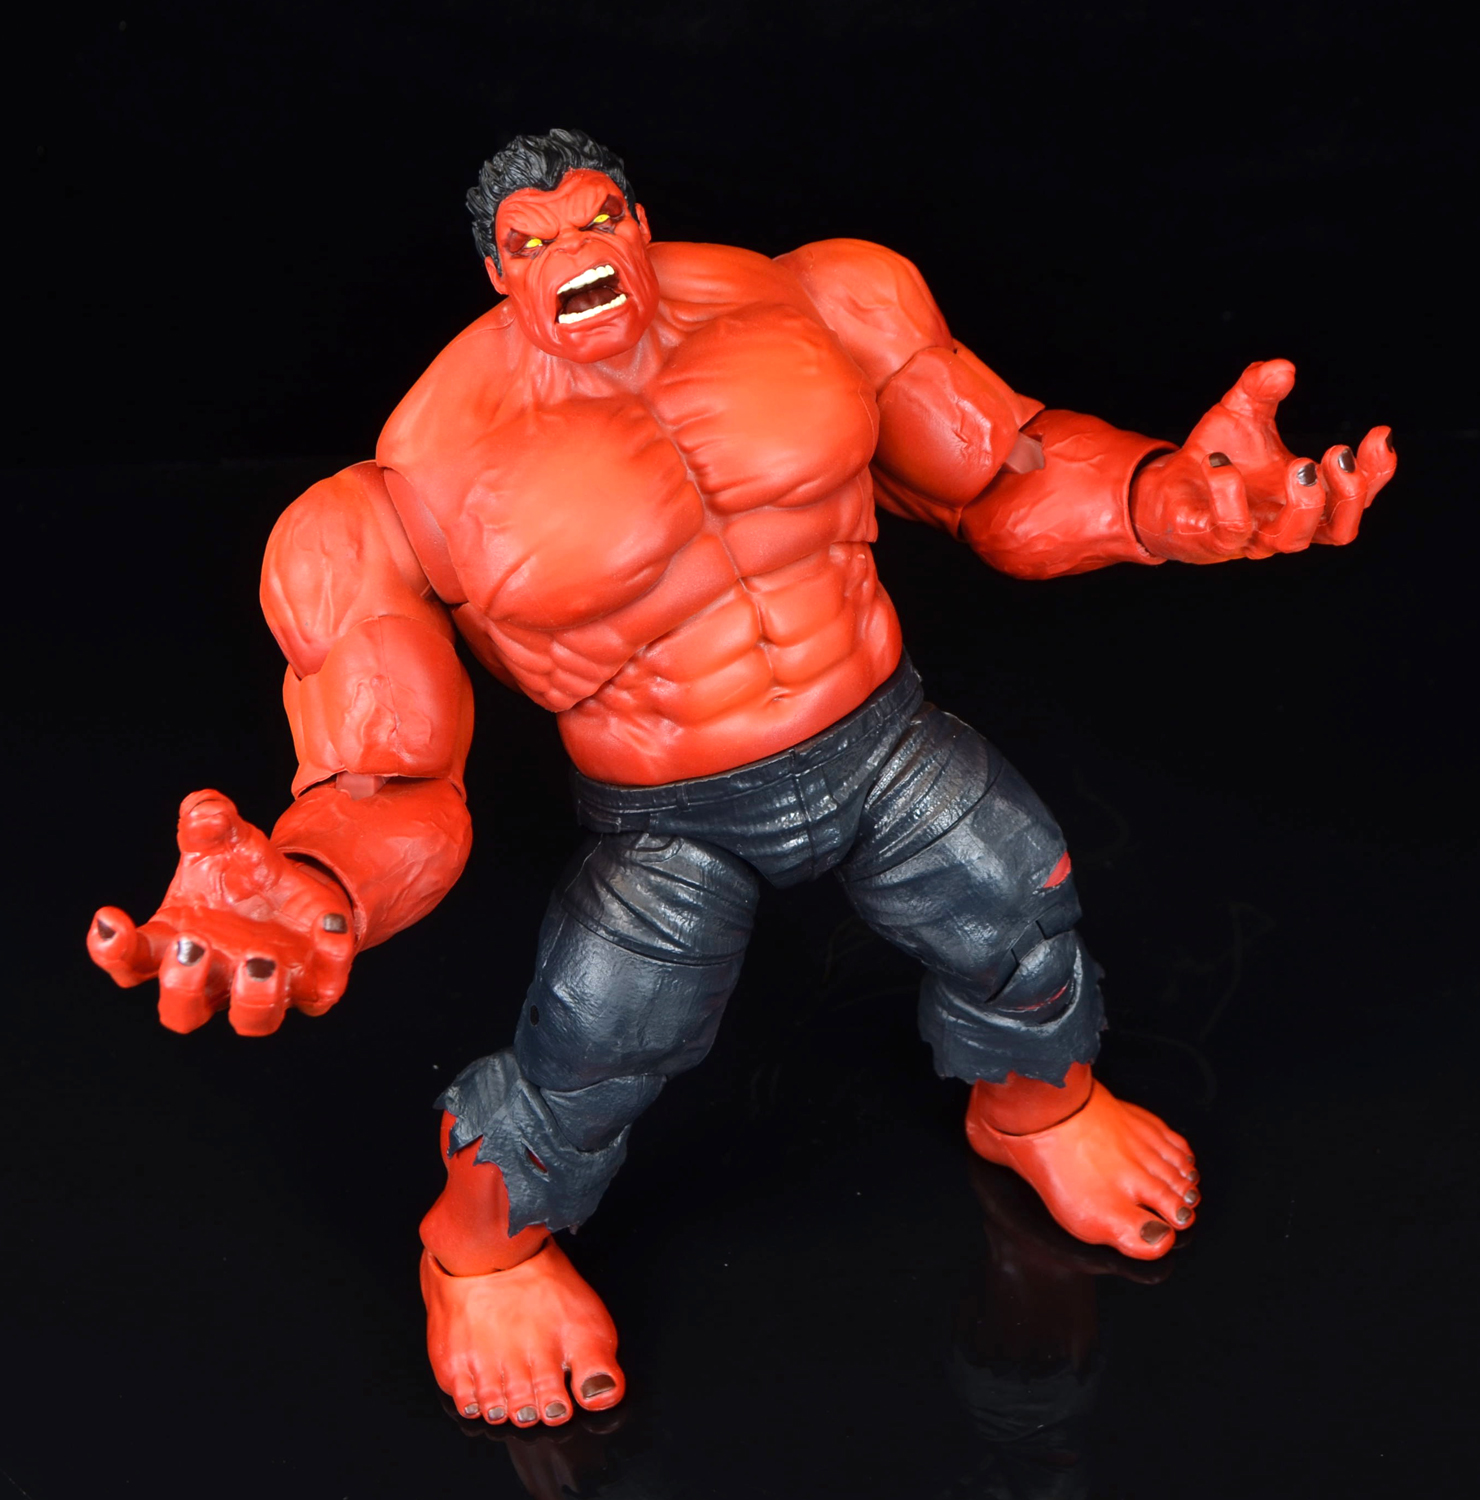 Marvel Legends Series Red Hulk TARGET EXCLUSIVE dans la main NEW 2020-Comme neuf BOX 